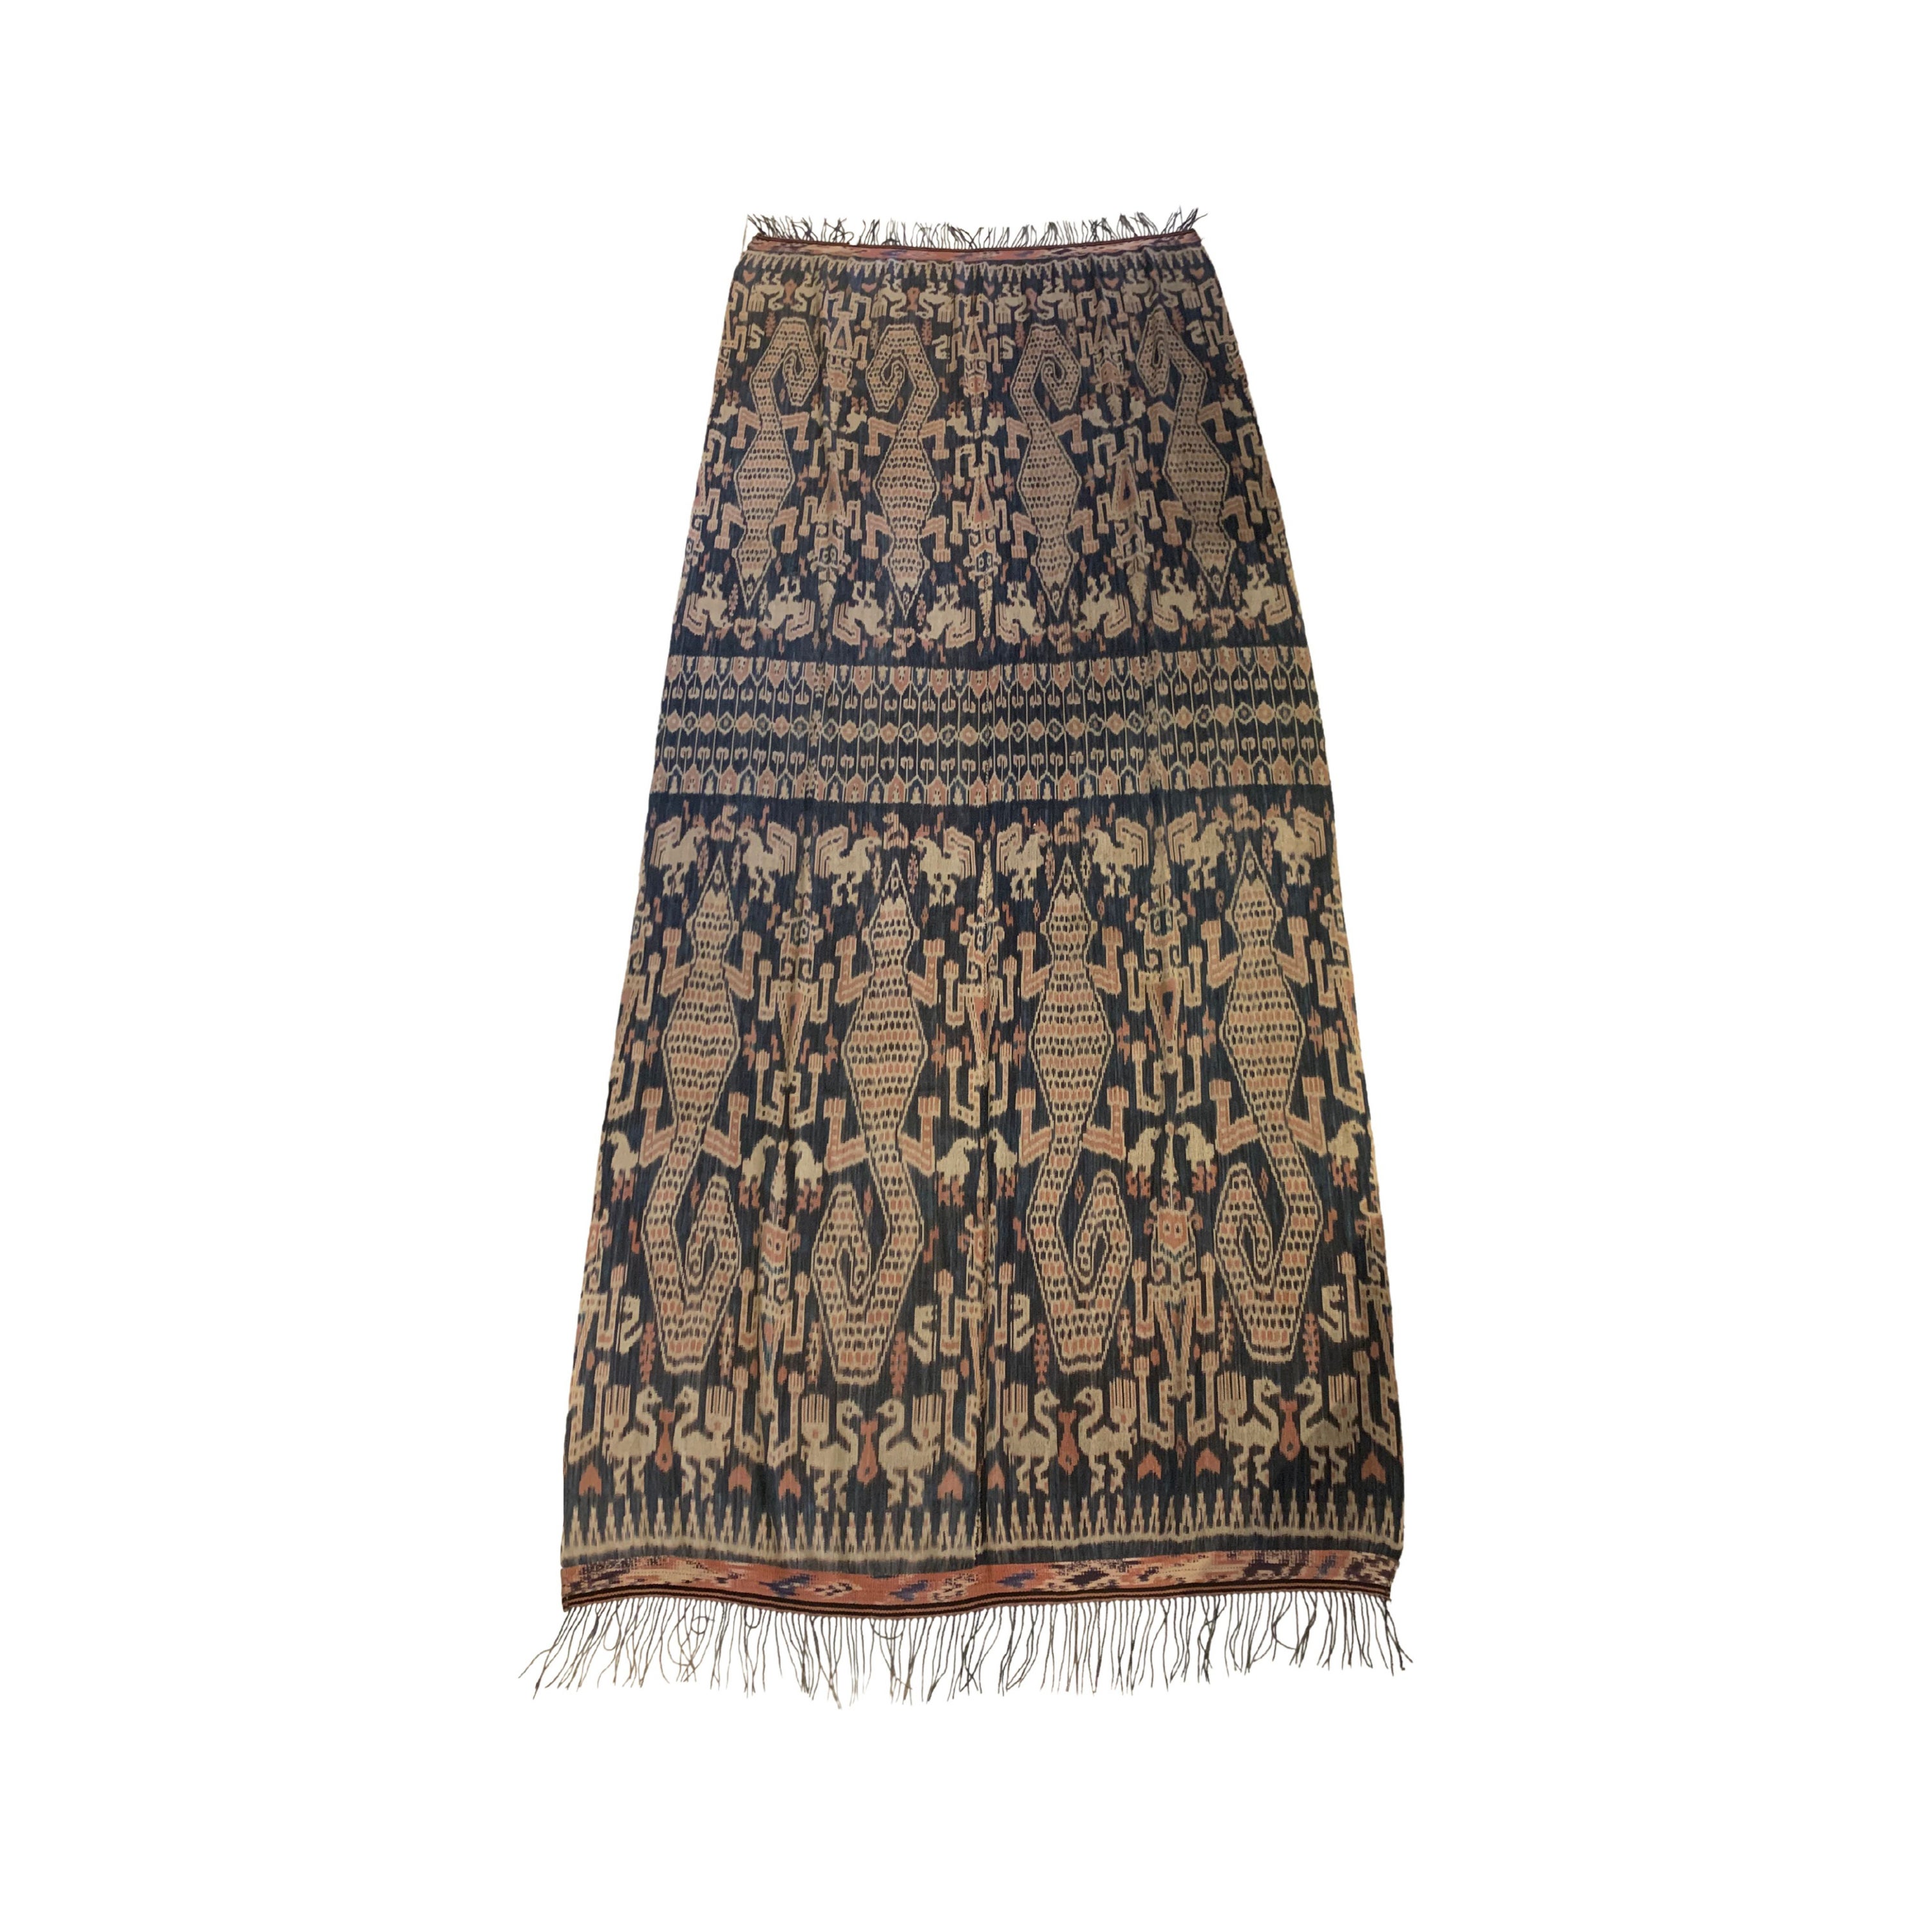 Ikat Textile from Sumba Island Tribal Motifs, Indonesia For Sale